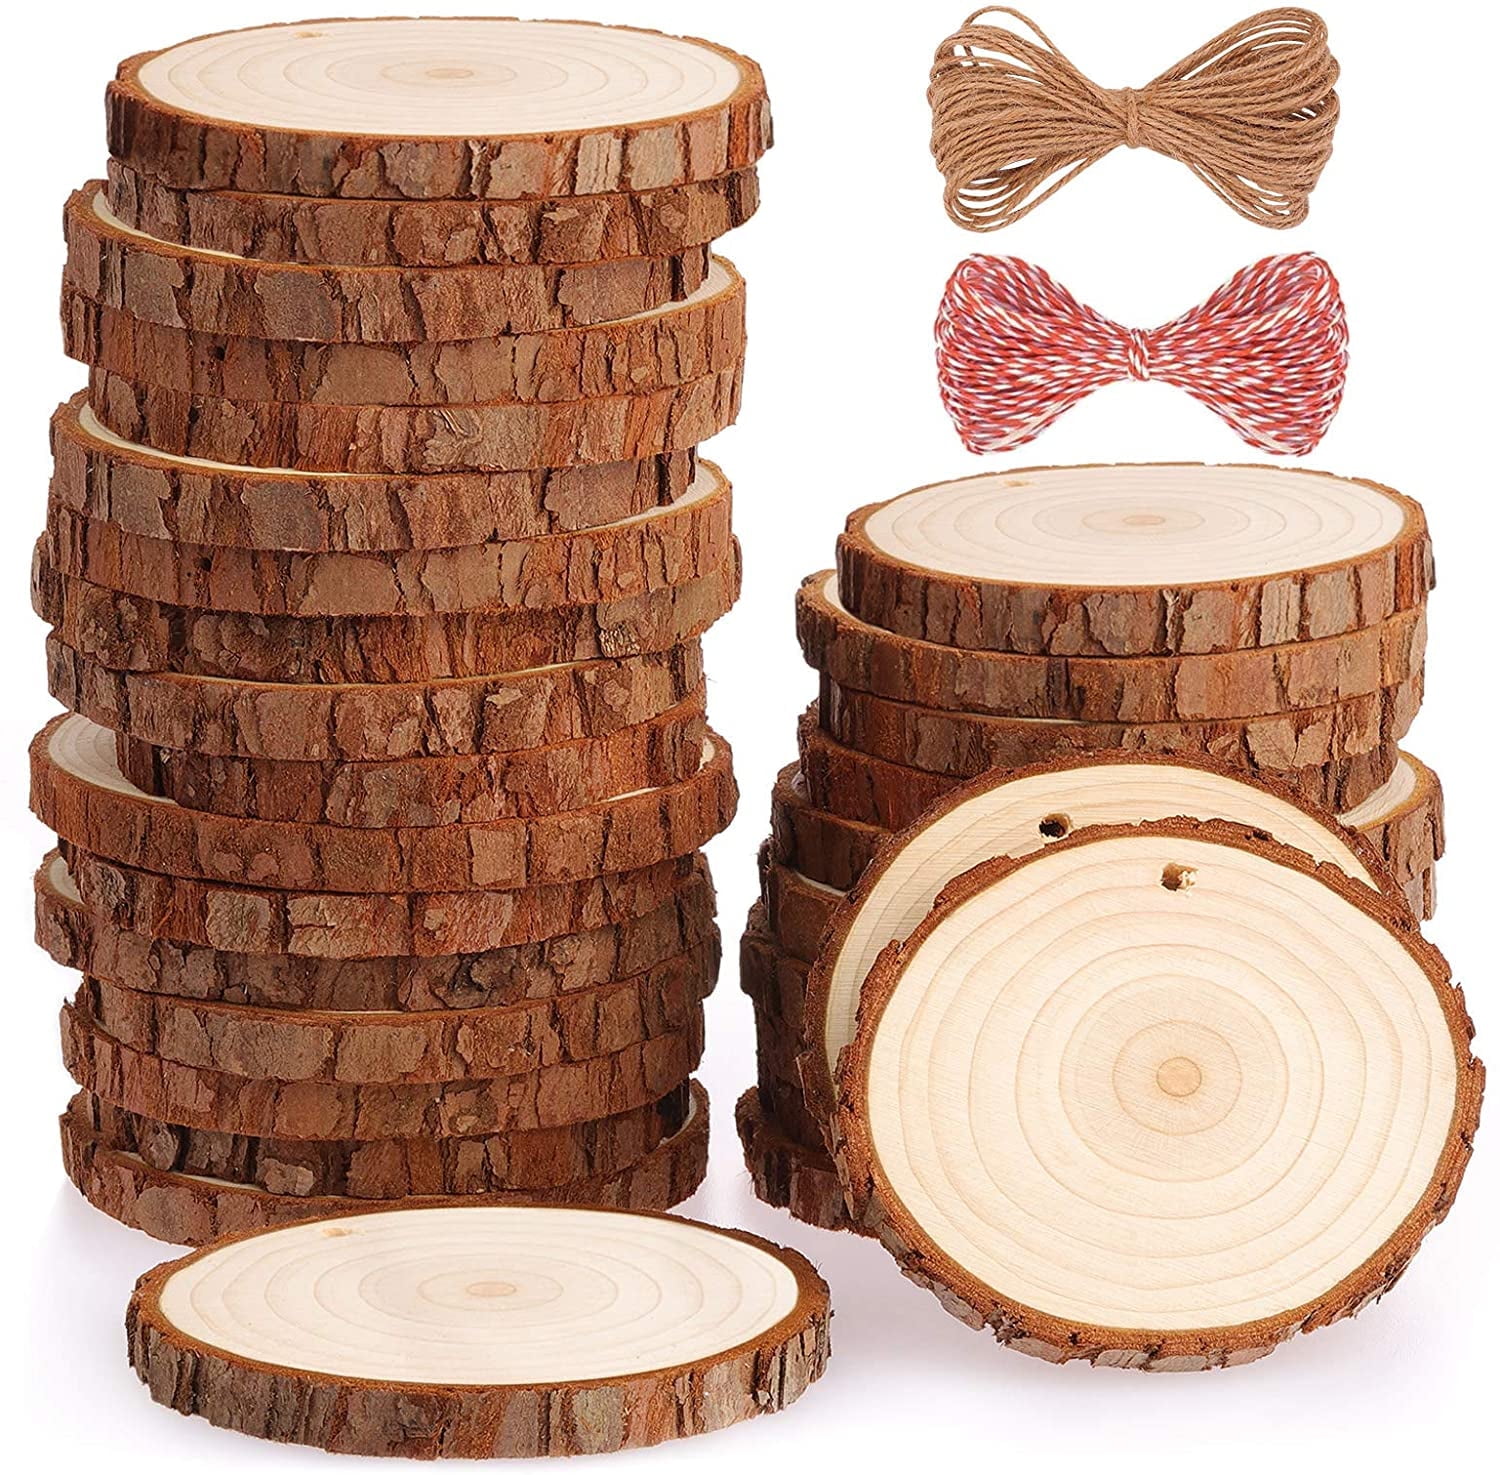 Blgat Natural Wood Slices - 10 Pcs 0.23-2.6 Inches Craft Unfinished Wood Kit Predrilled with Hole Wooden Circles for Arts Wood Slices A, Size: One